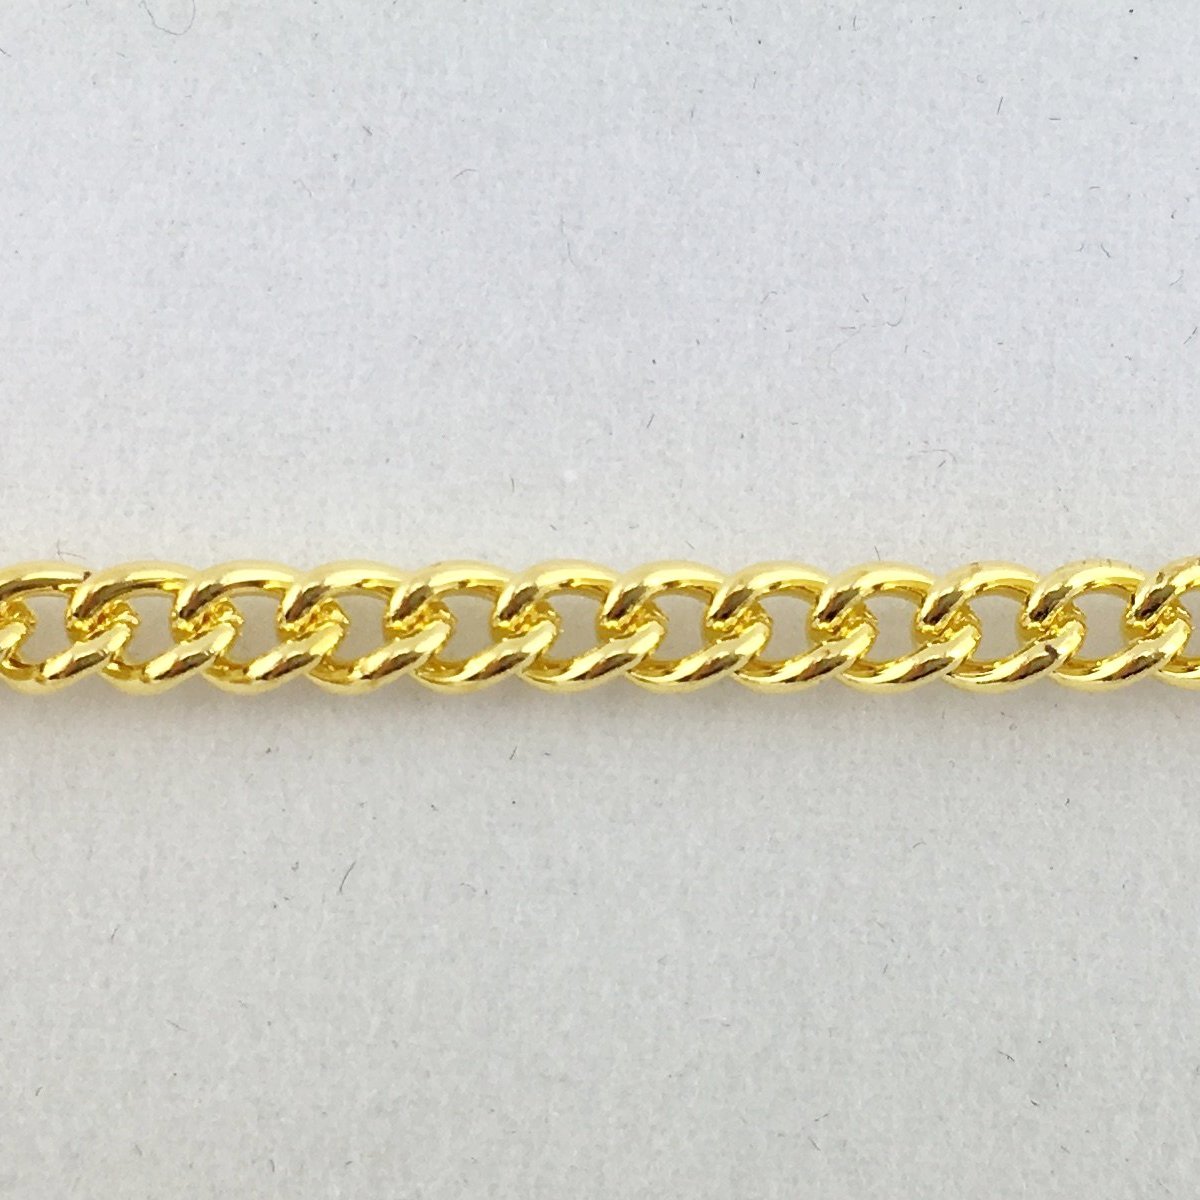 Jewellery Curb Chain in gold plate, Quantity 25 metres. Australia wide delivery via Melbourne